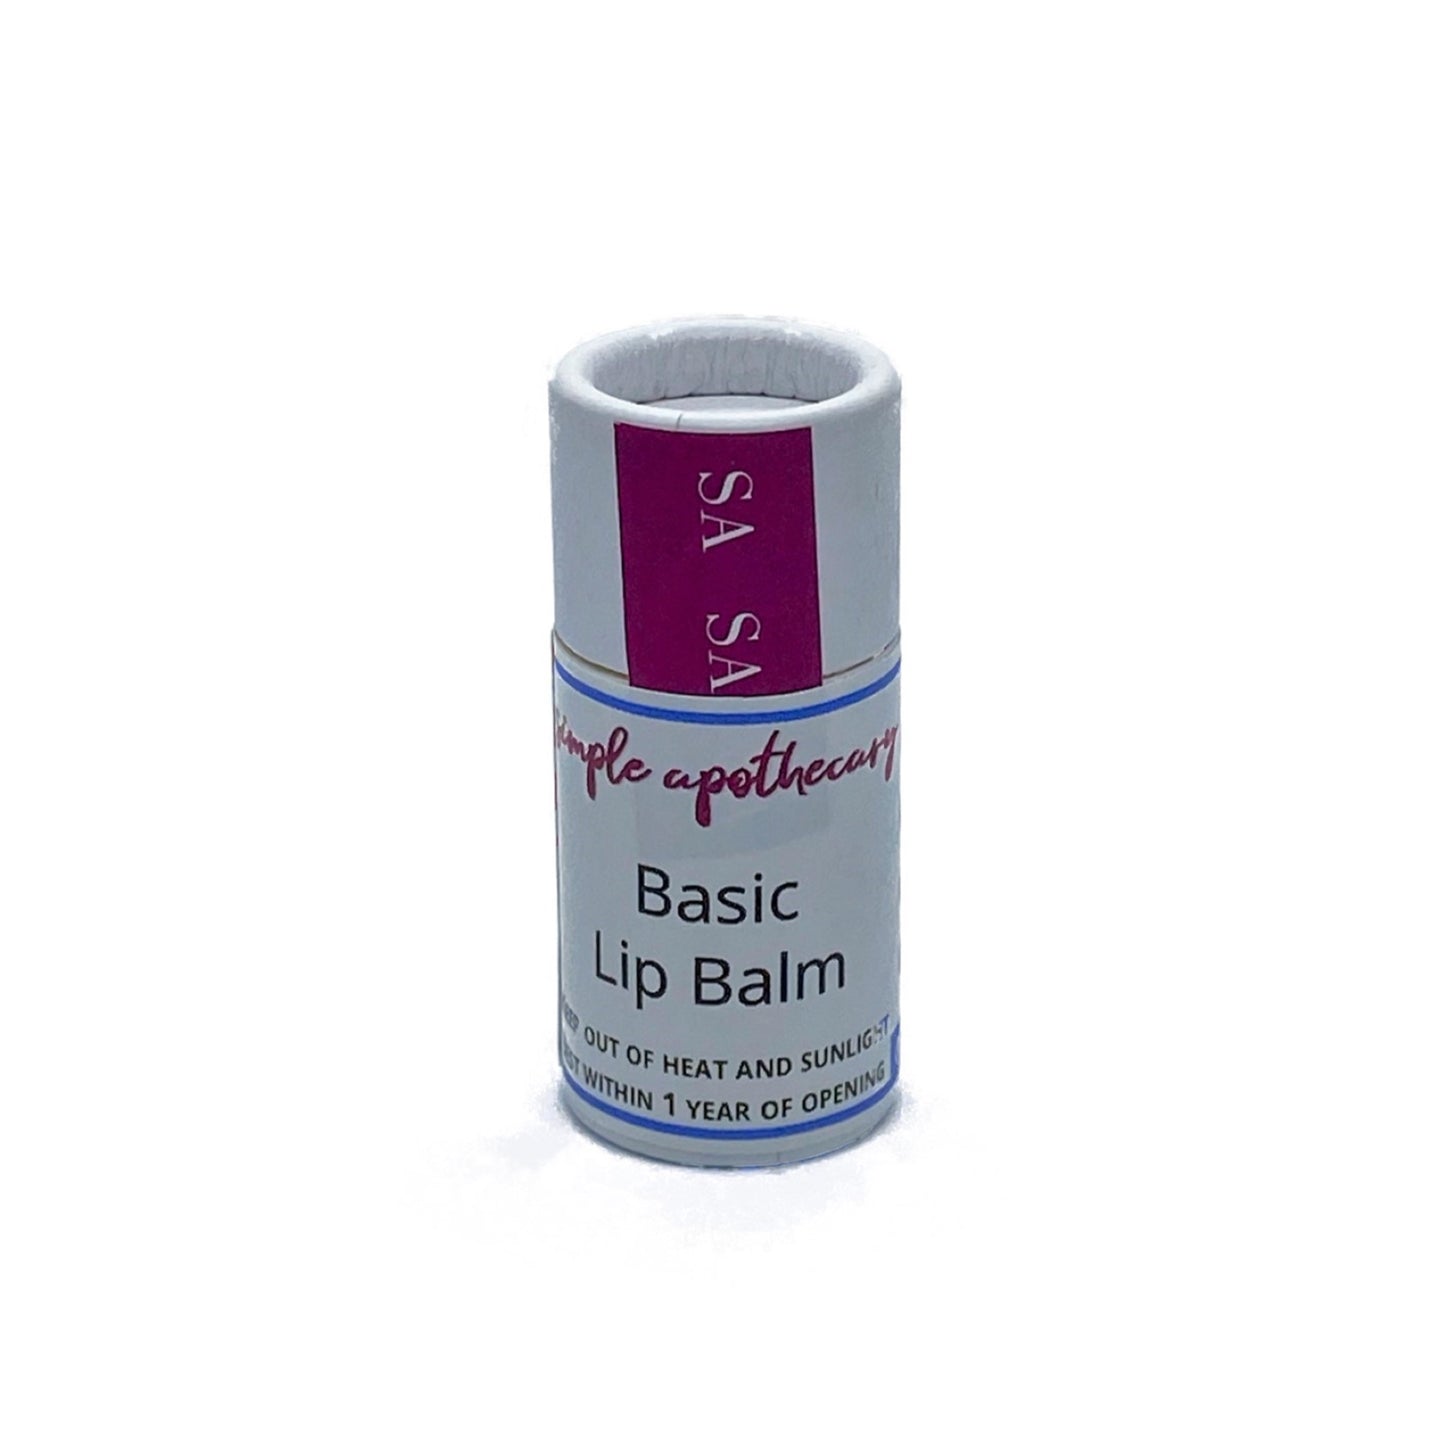 Basic Lip Balm is unflavored for lip health.